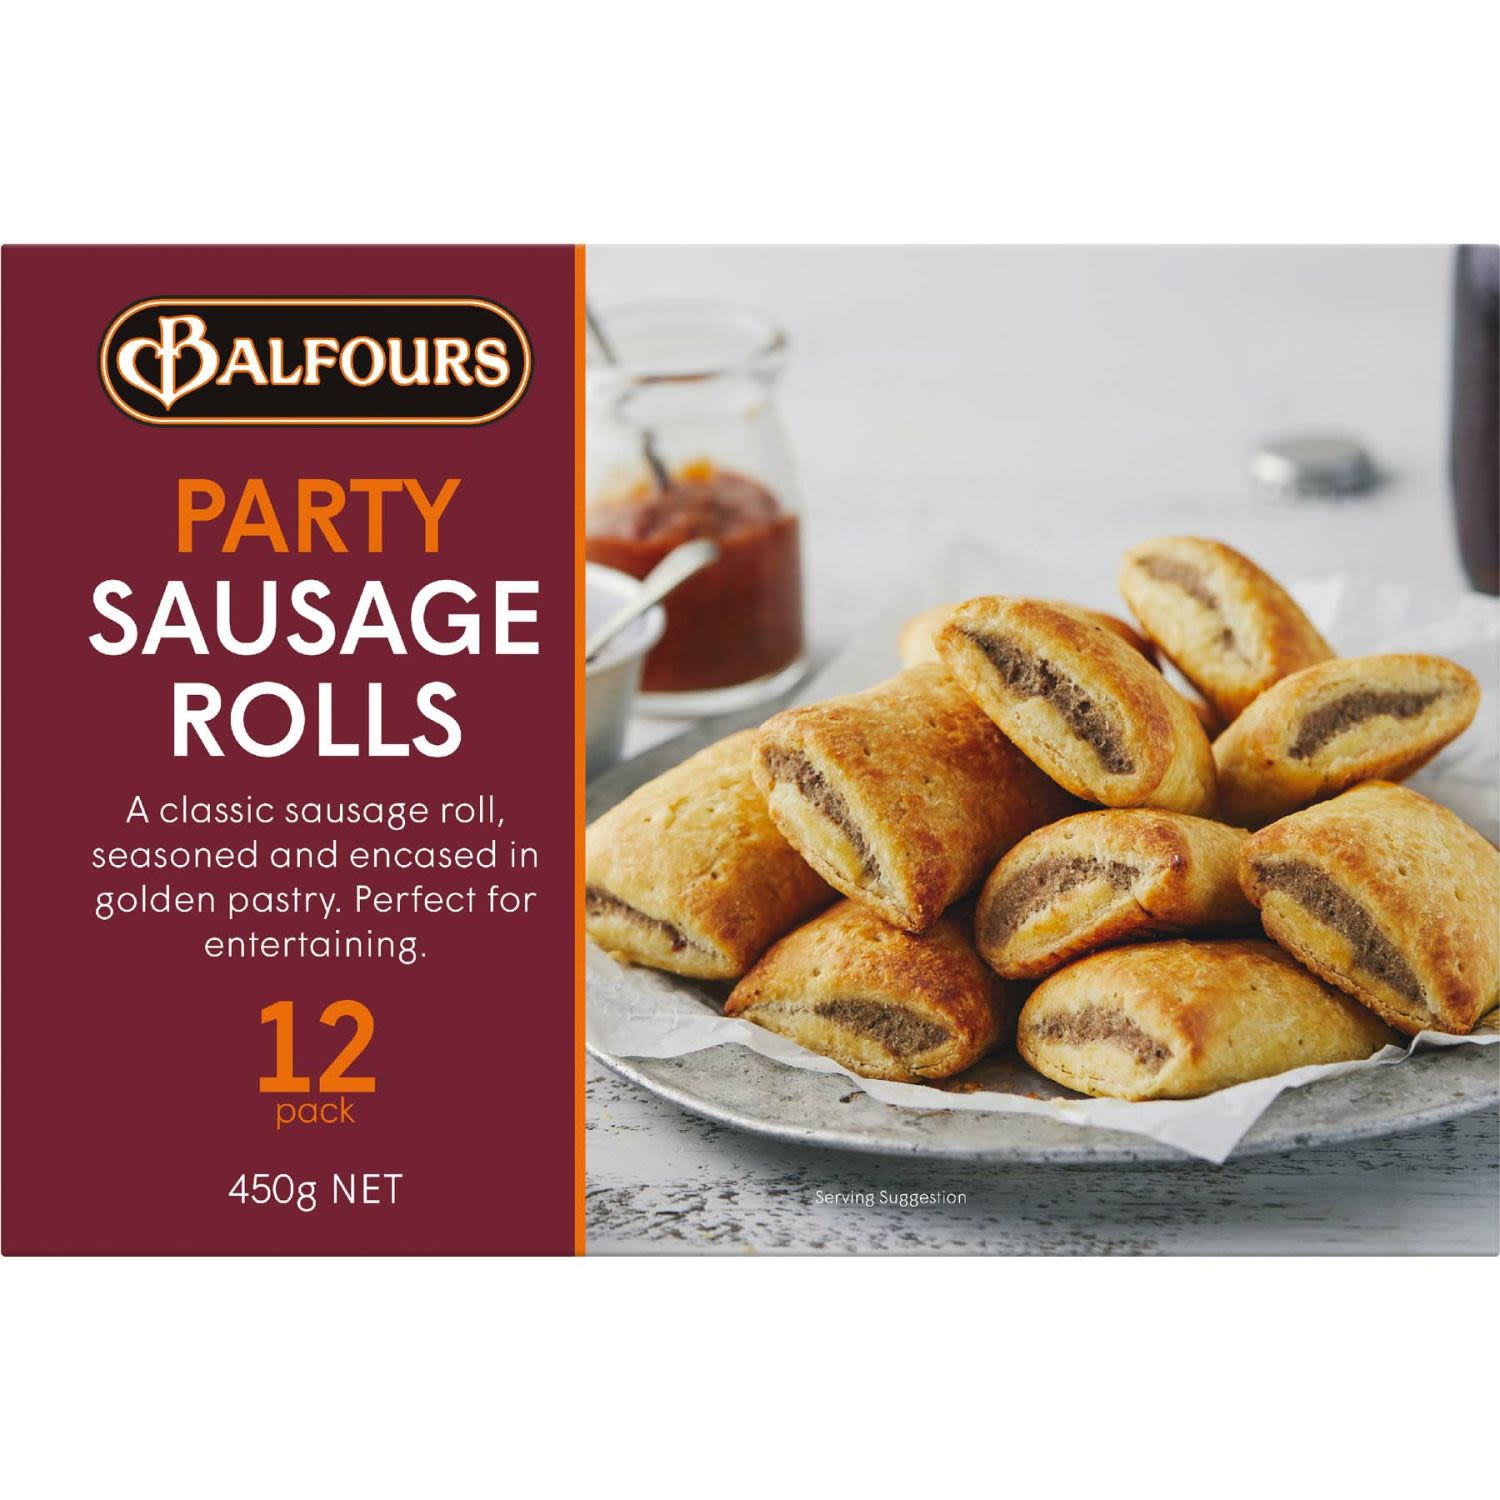 Balfours Party Sausage Rolls, 12 Each